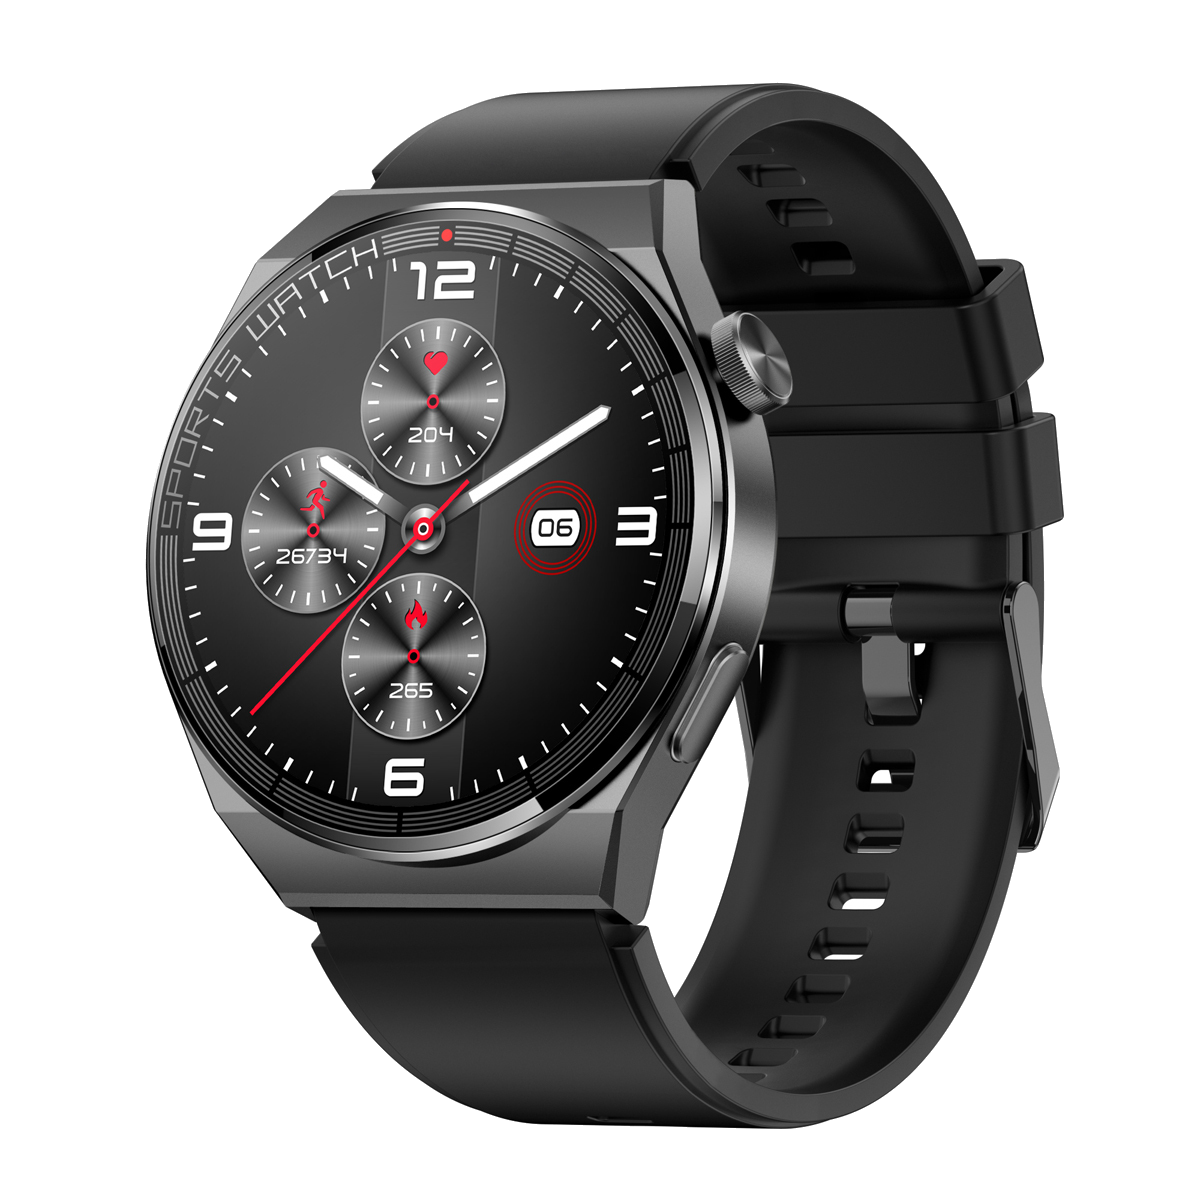 ST62 Dagnet Smartwatch Black Silicone Band Side View.jpg